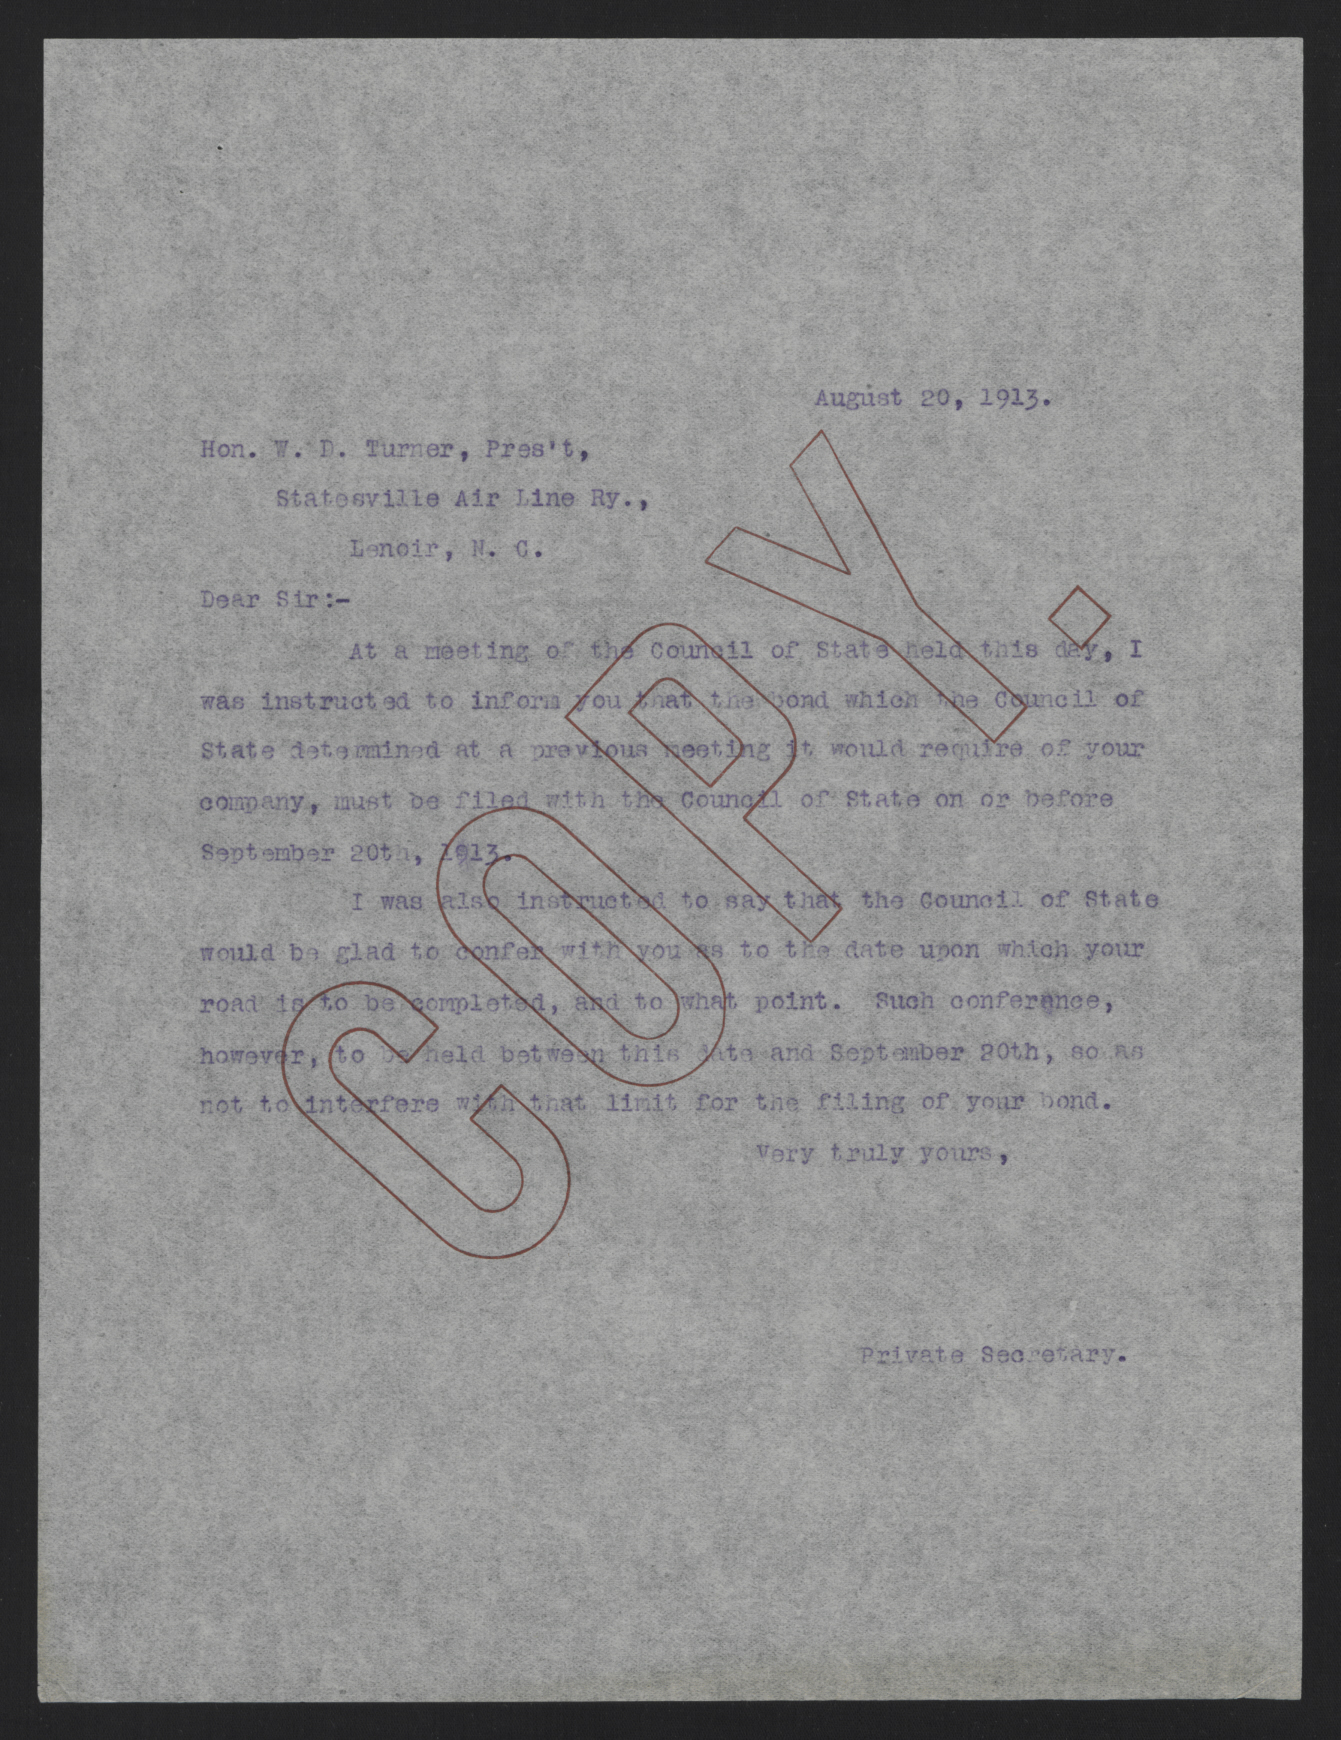 Letter from Kerr to Turner, August 20, 1913